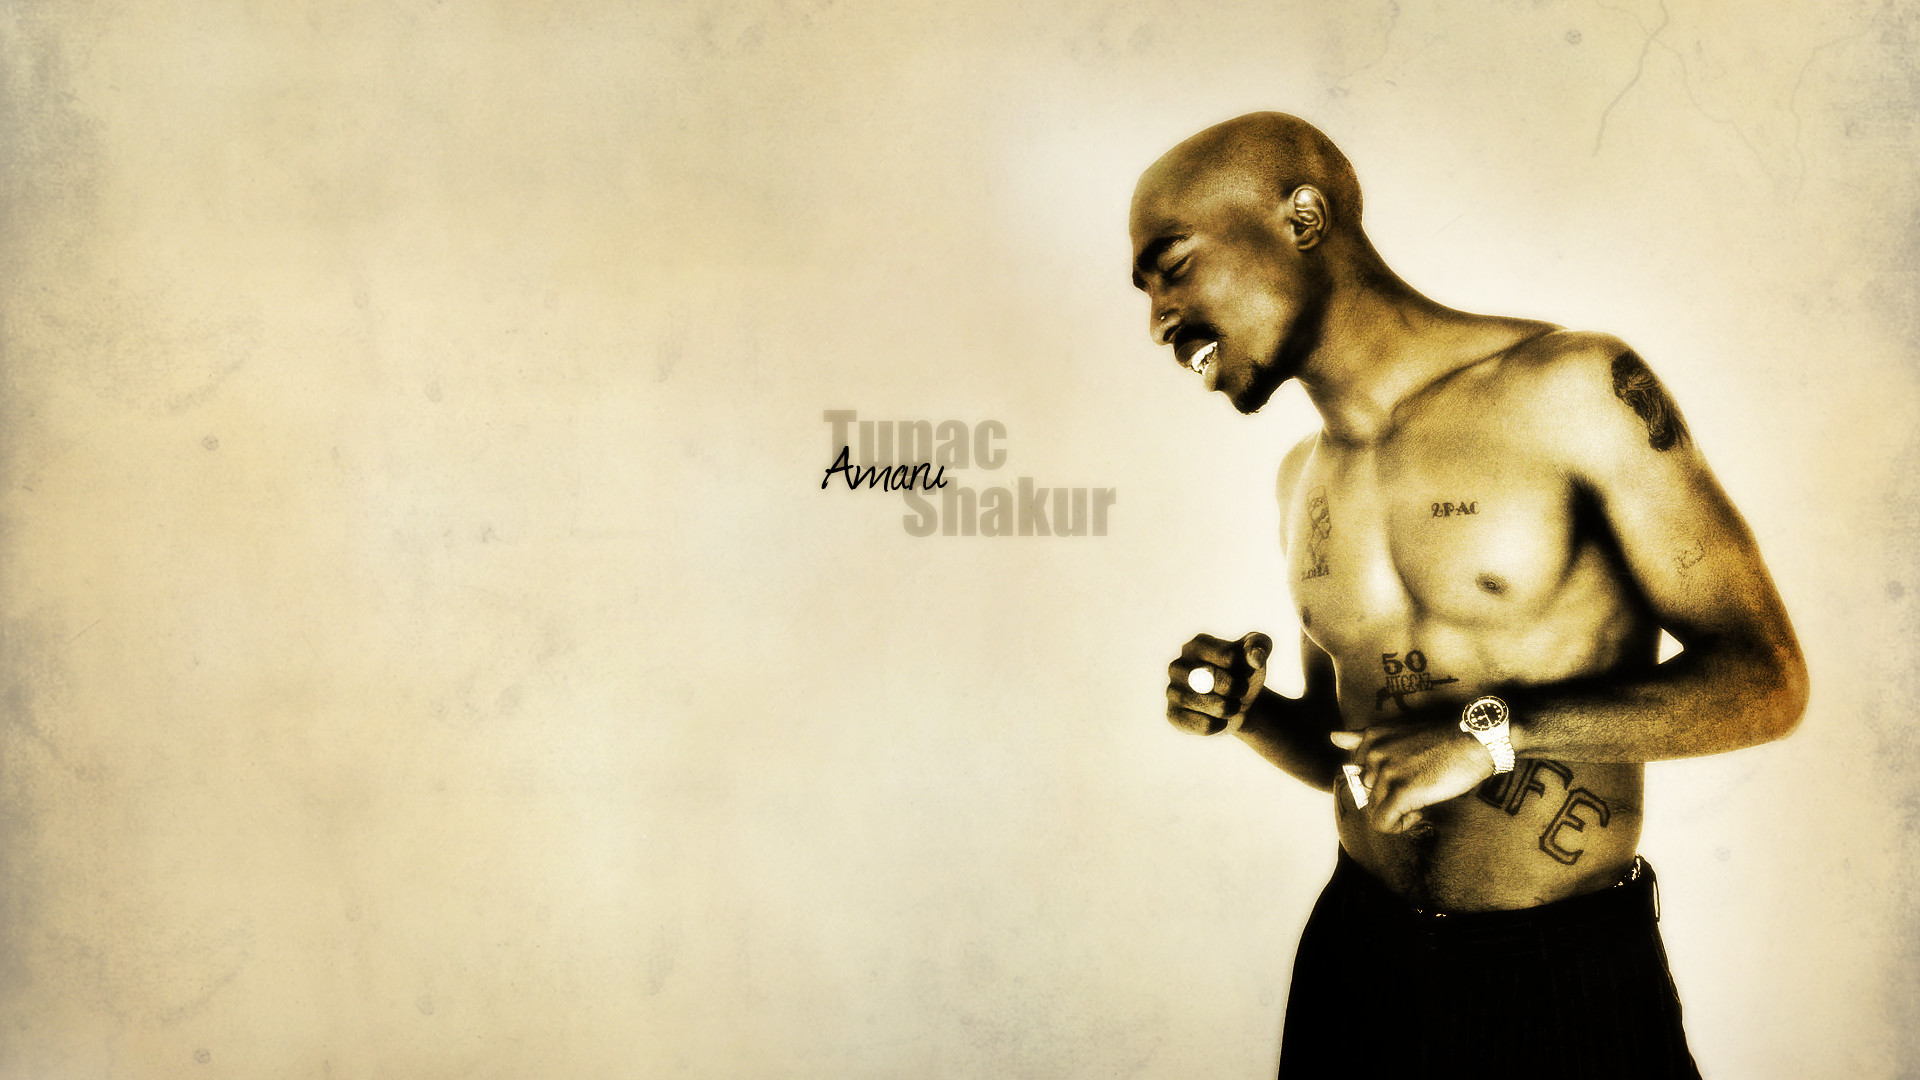 1920x1080 Tupac Shakur Wallpapers, Pictures, Images